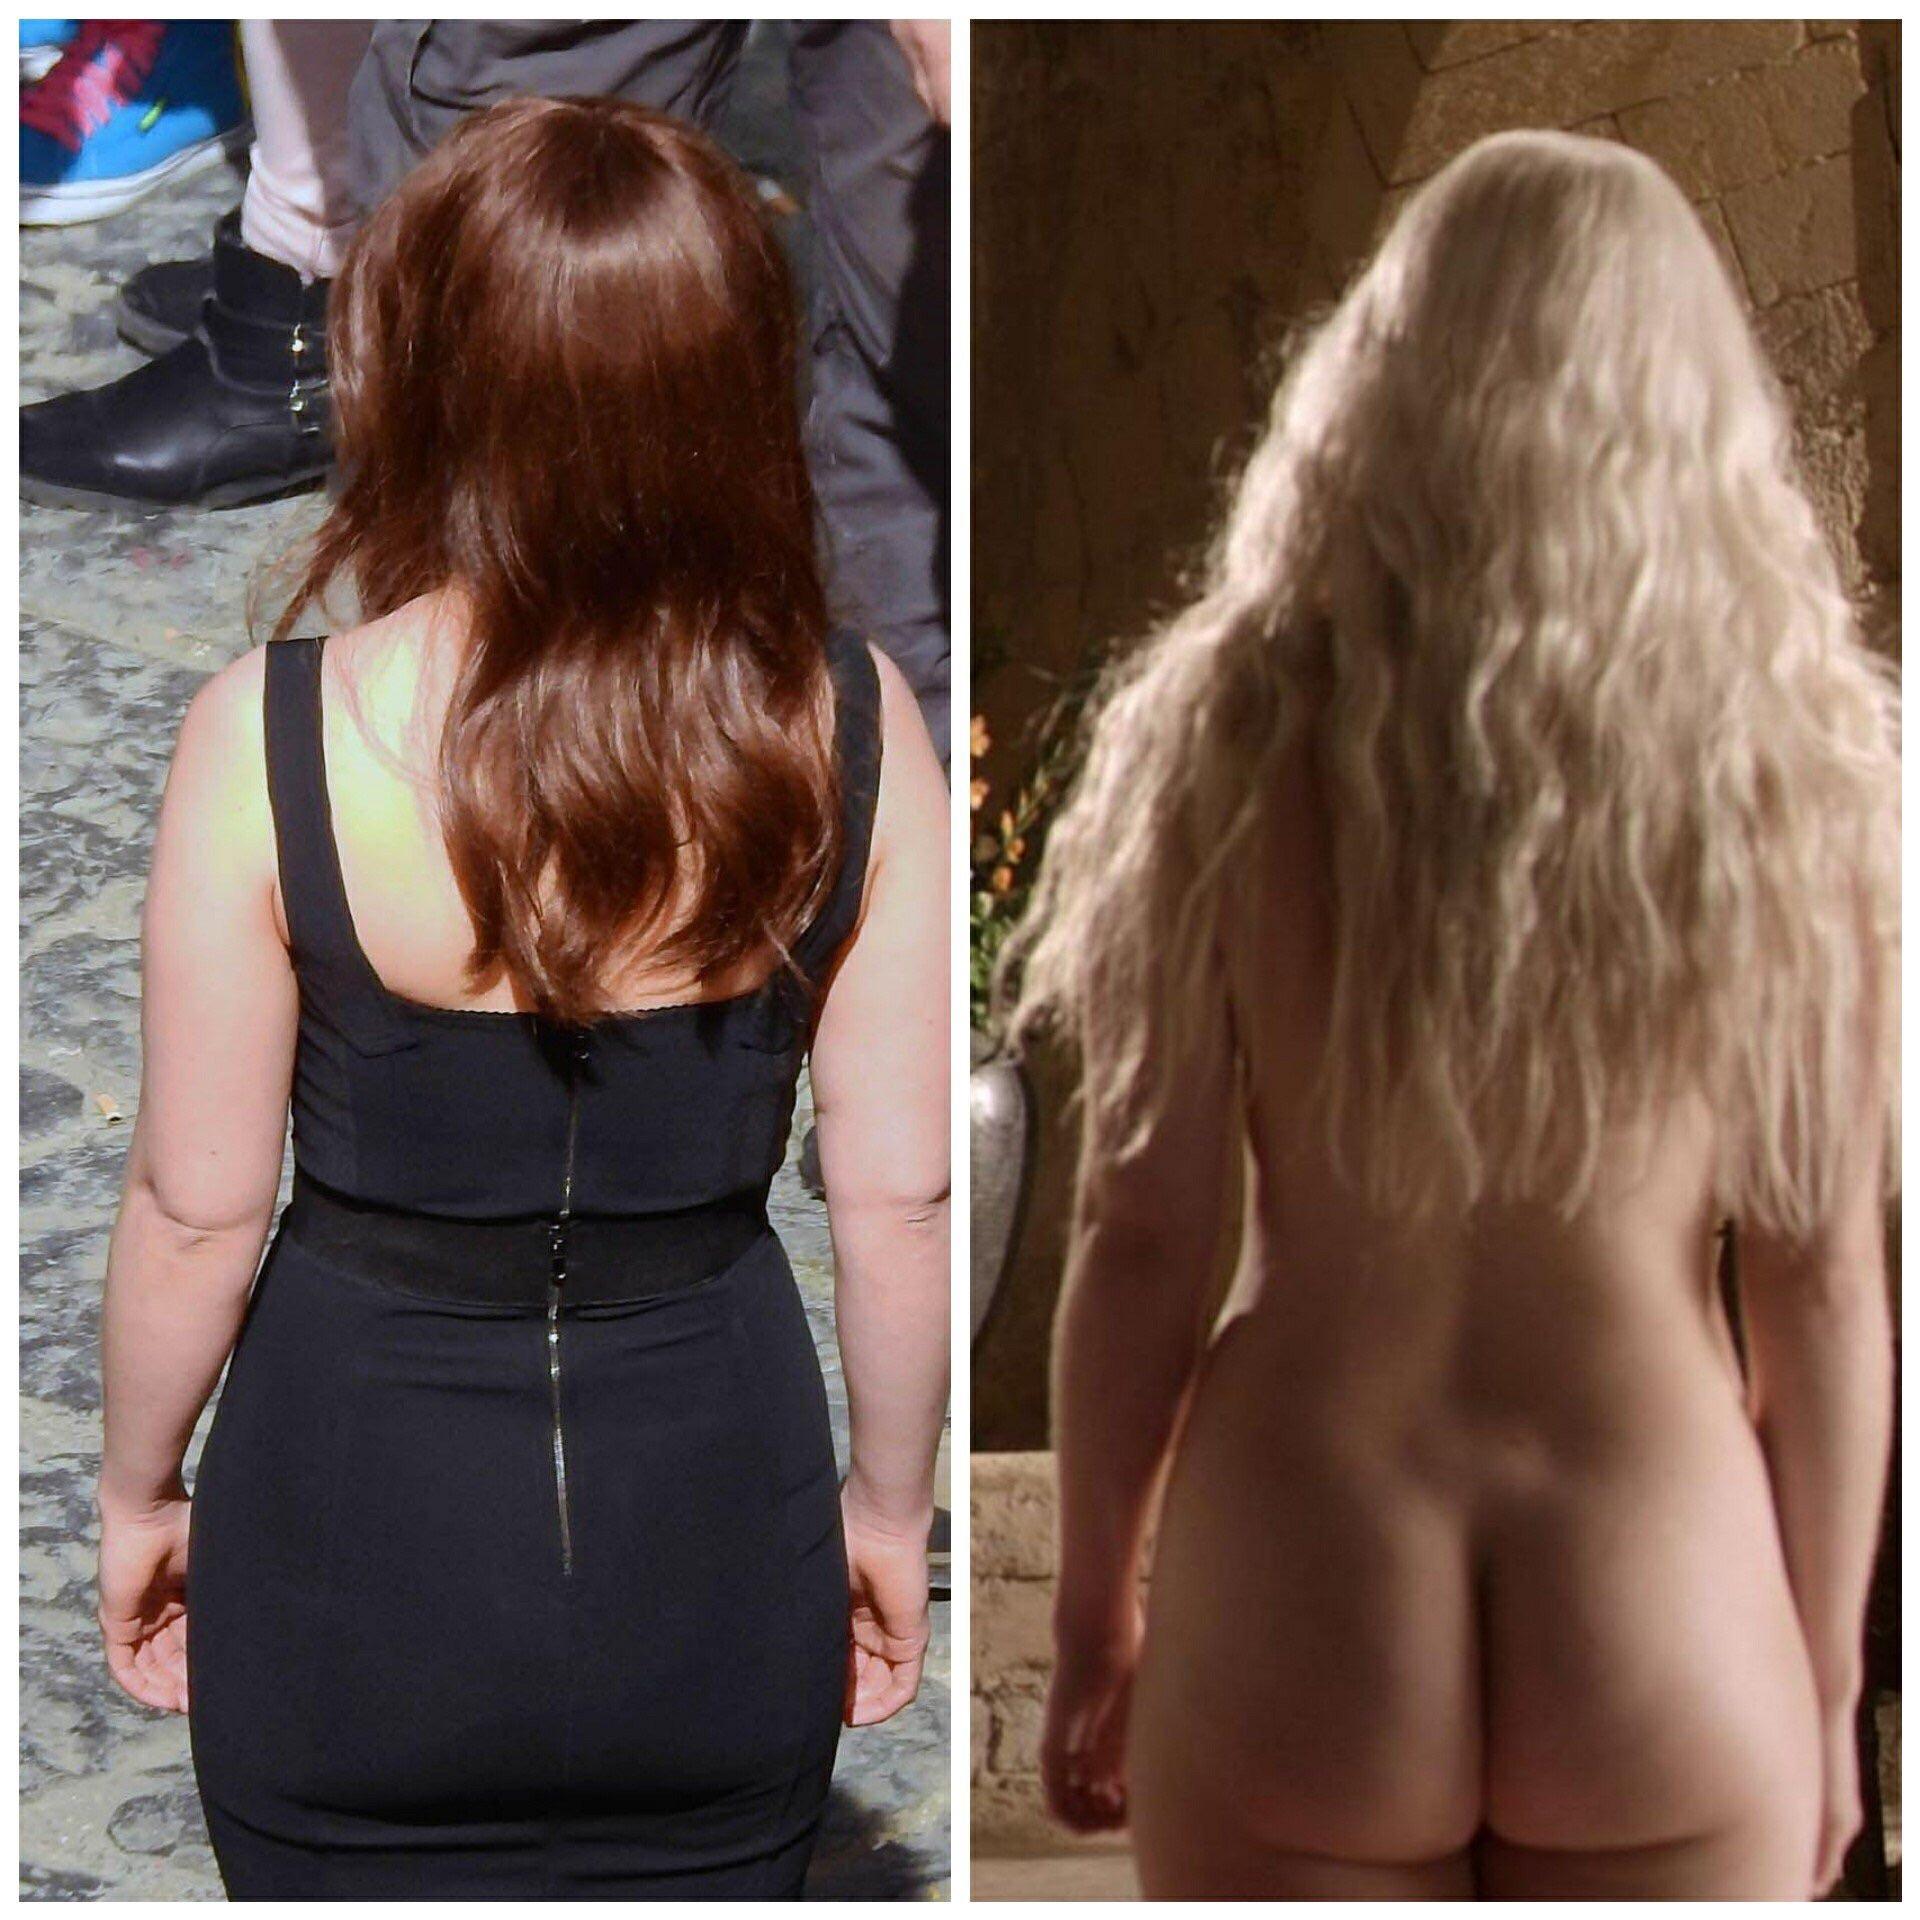 Emilia Clarke's incredible ass in an On/Off. 